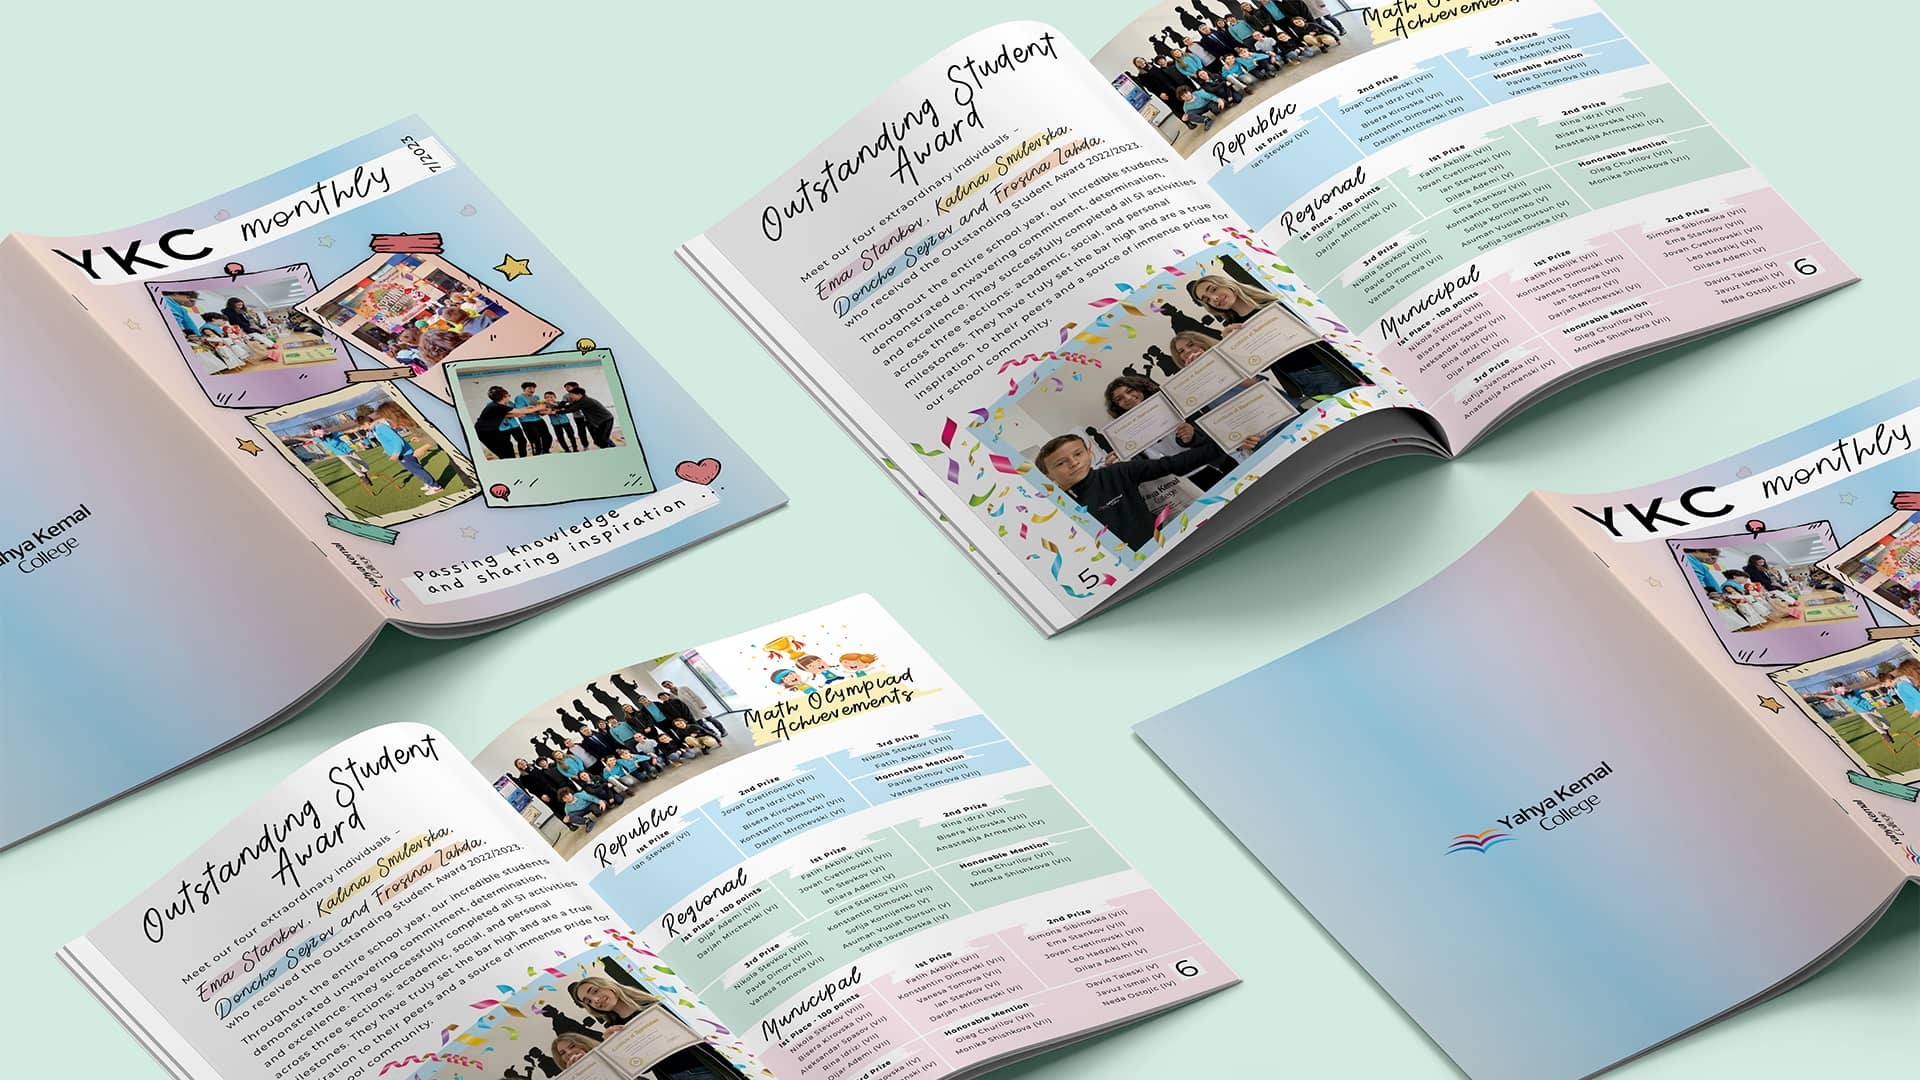 Yahya Kemal Elementary - Skopje students: The eagerly awaited new issue of the school magazine is finally here!